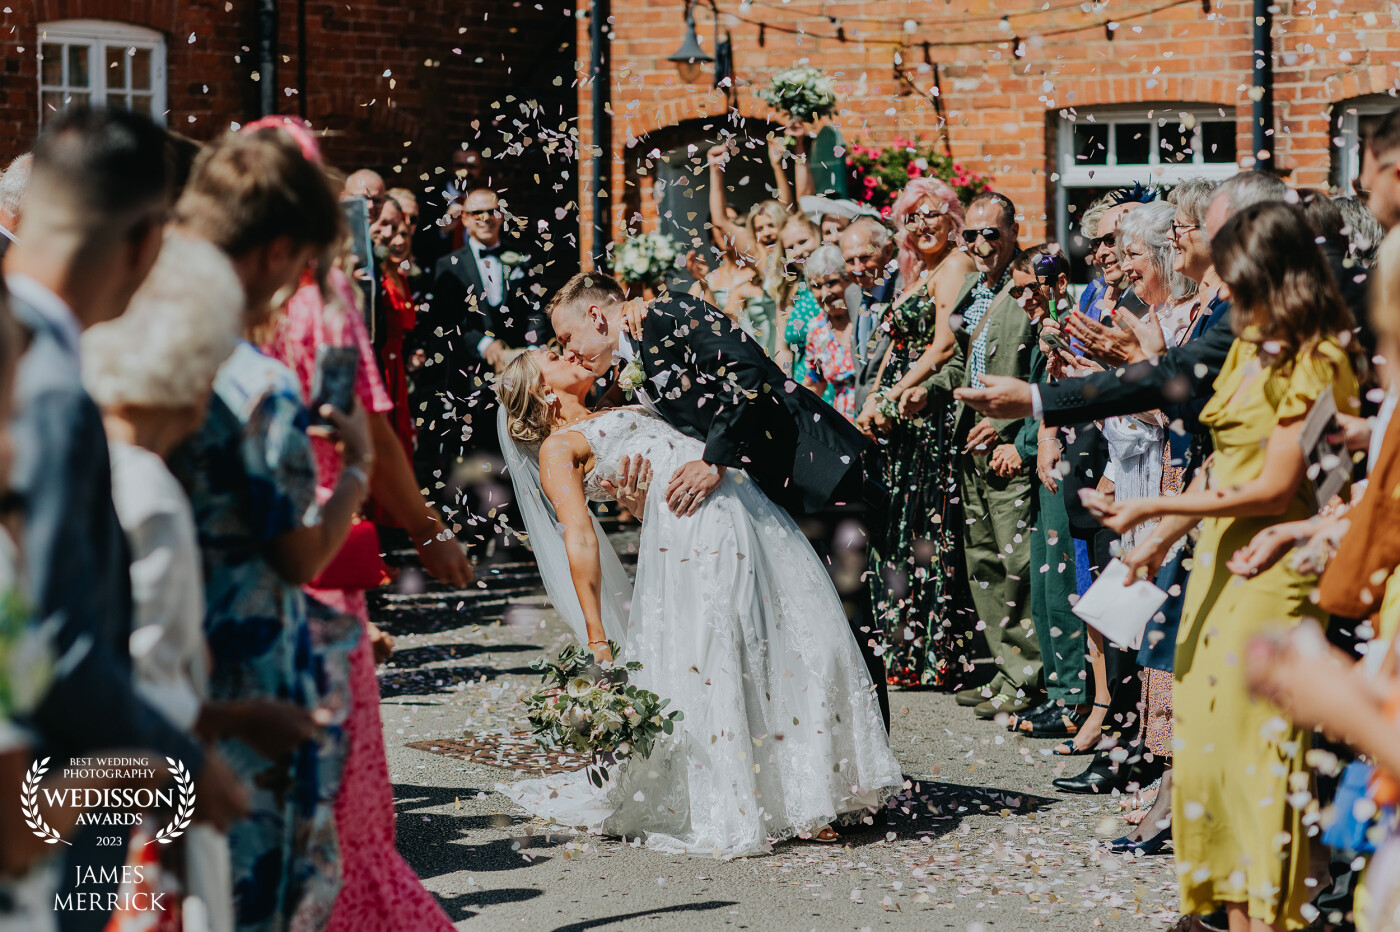 Not only was this an epic blizzard of confetti for Annie & Sam, but to stop and do a dip & kiss just sealed the shot!